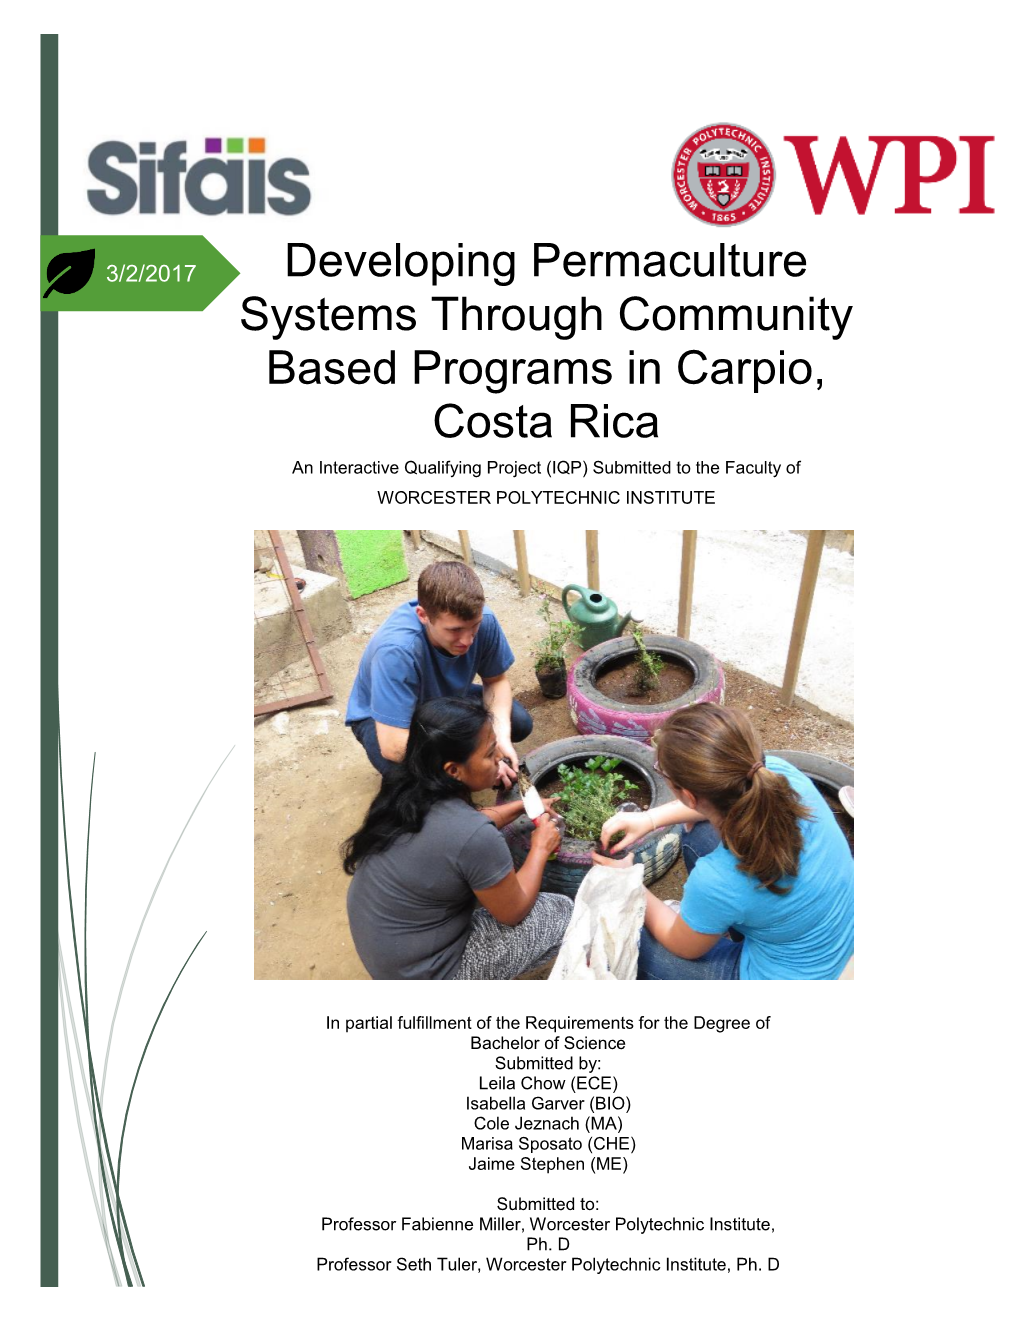 Developing Permaculture Systems Through Community Based Programs in Carpio, Costa Rica